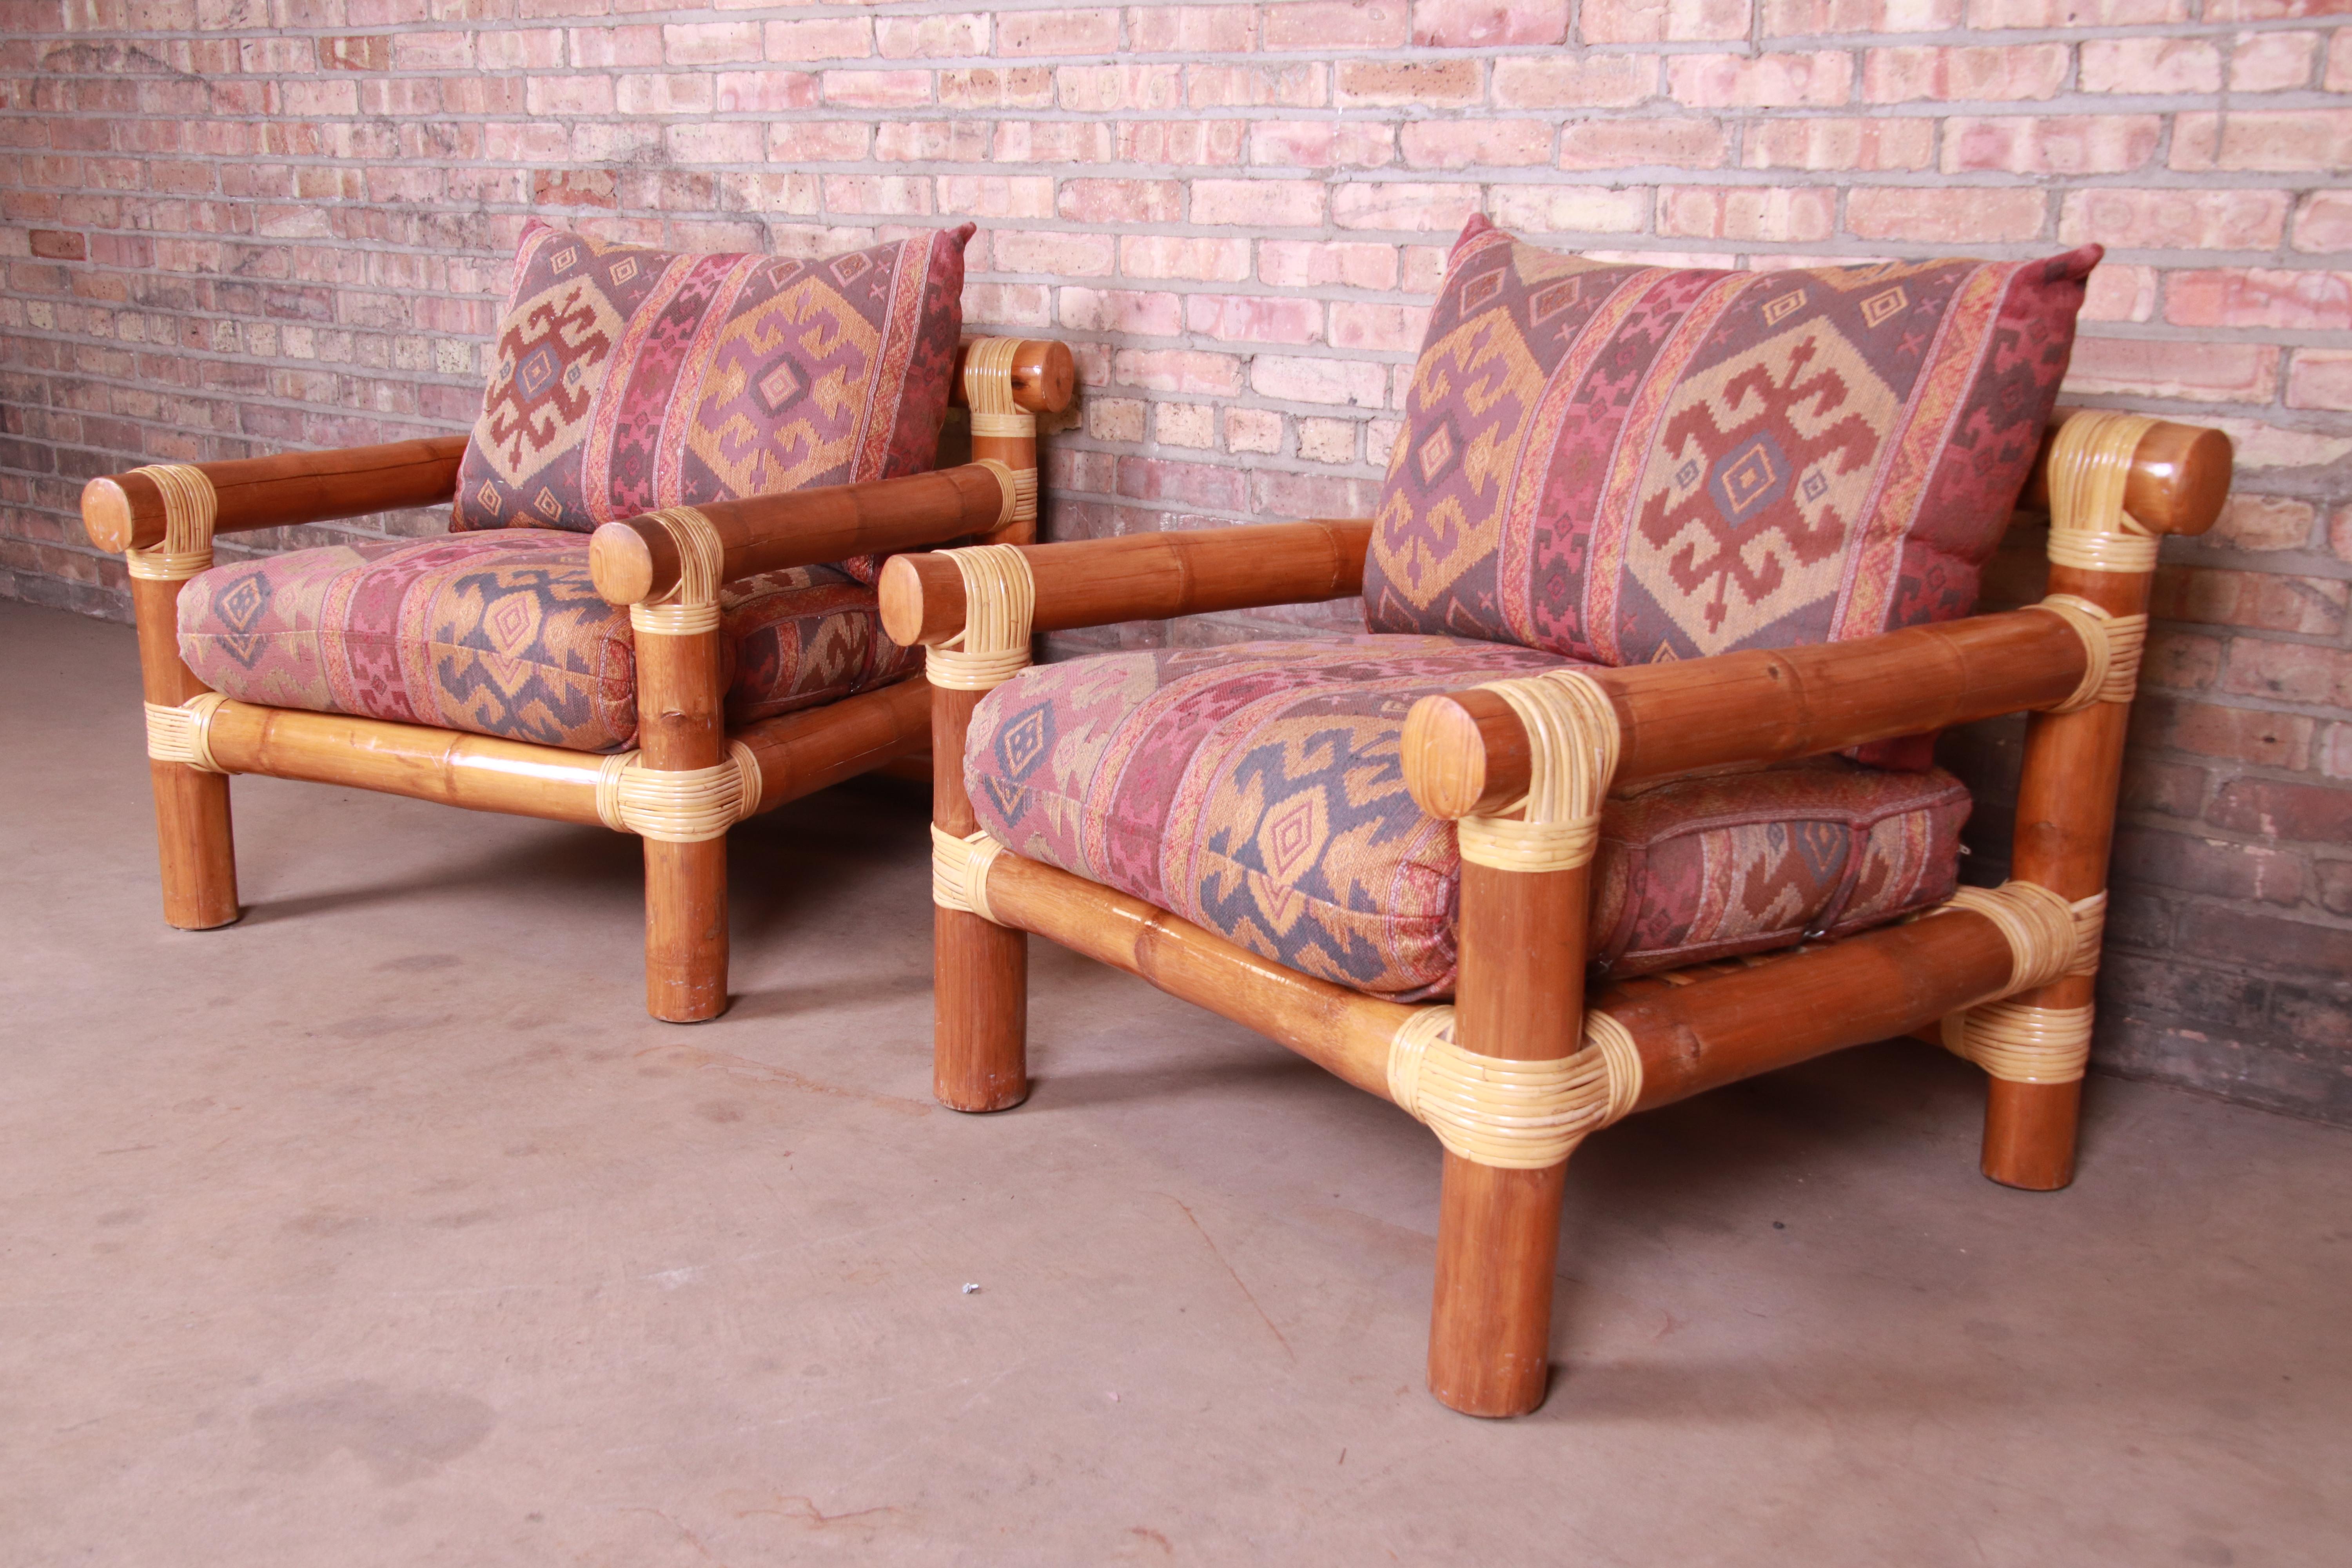 Oversized Bamboo Rattan Lounge Chairs and Ottoman In Good Condition For Sale In South Bend, IN